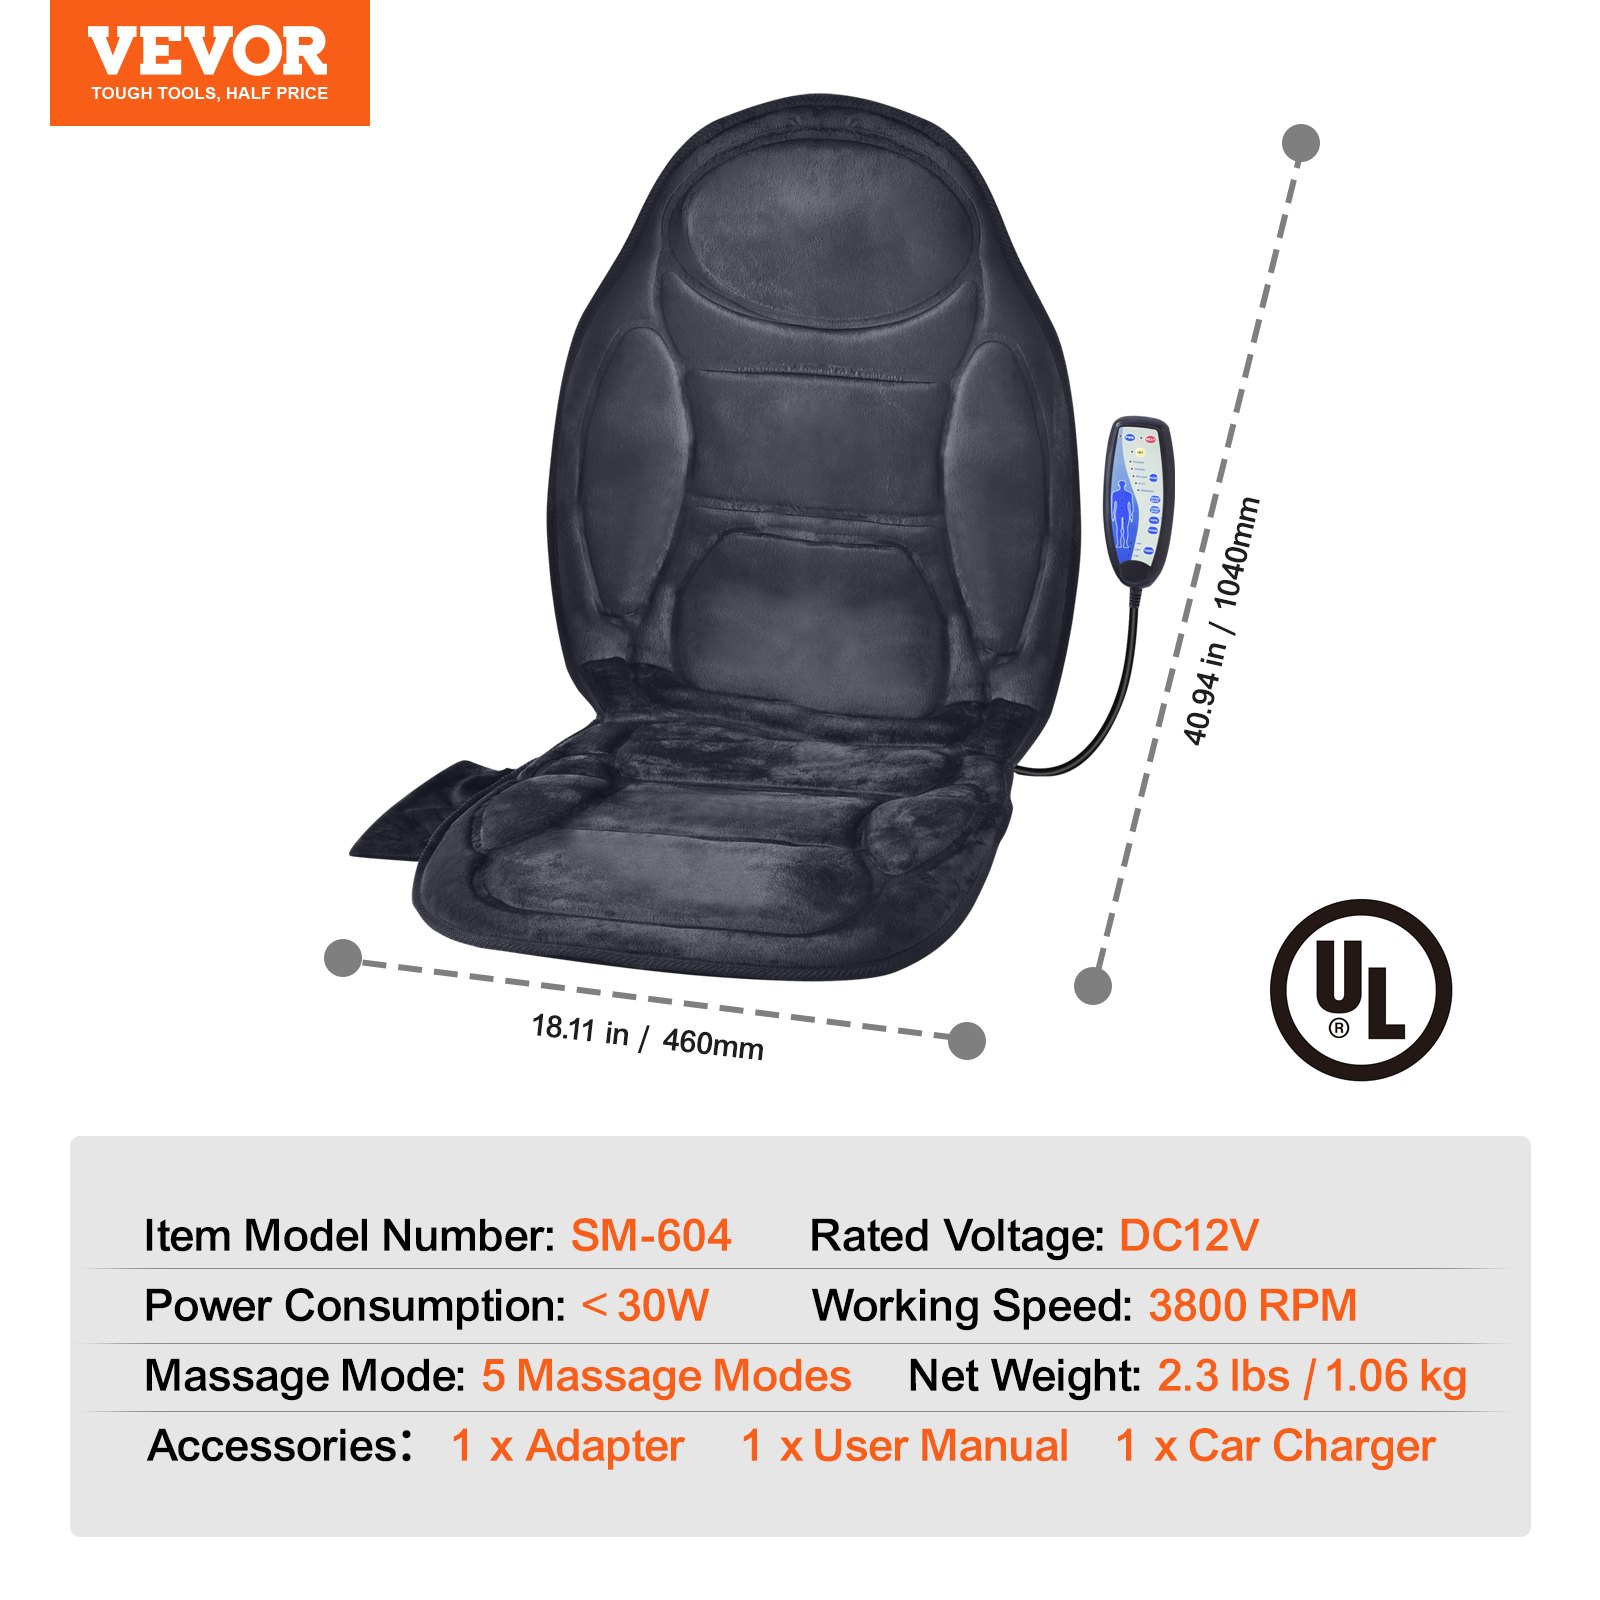 VEVOR Massage Seat Cushion with Heat, 6 Vibration Motors Seat Massage Pad, Vibrating Massage Chair Mat with 5 Mode & 4 Intensities, 2 Heating Pads for Home Office, Fatigue Stress Relief for Back, Hips, Goodies N Stuff